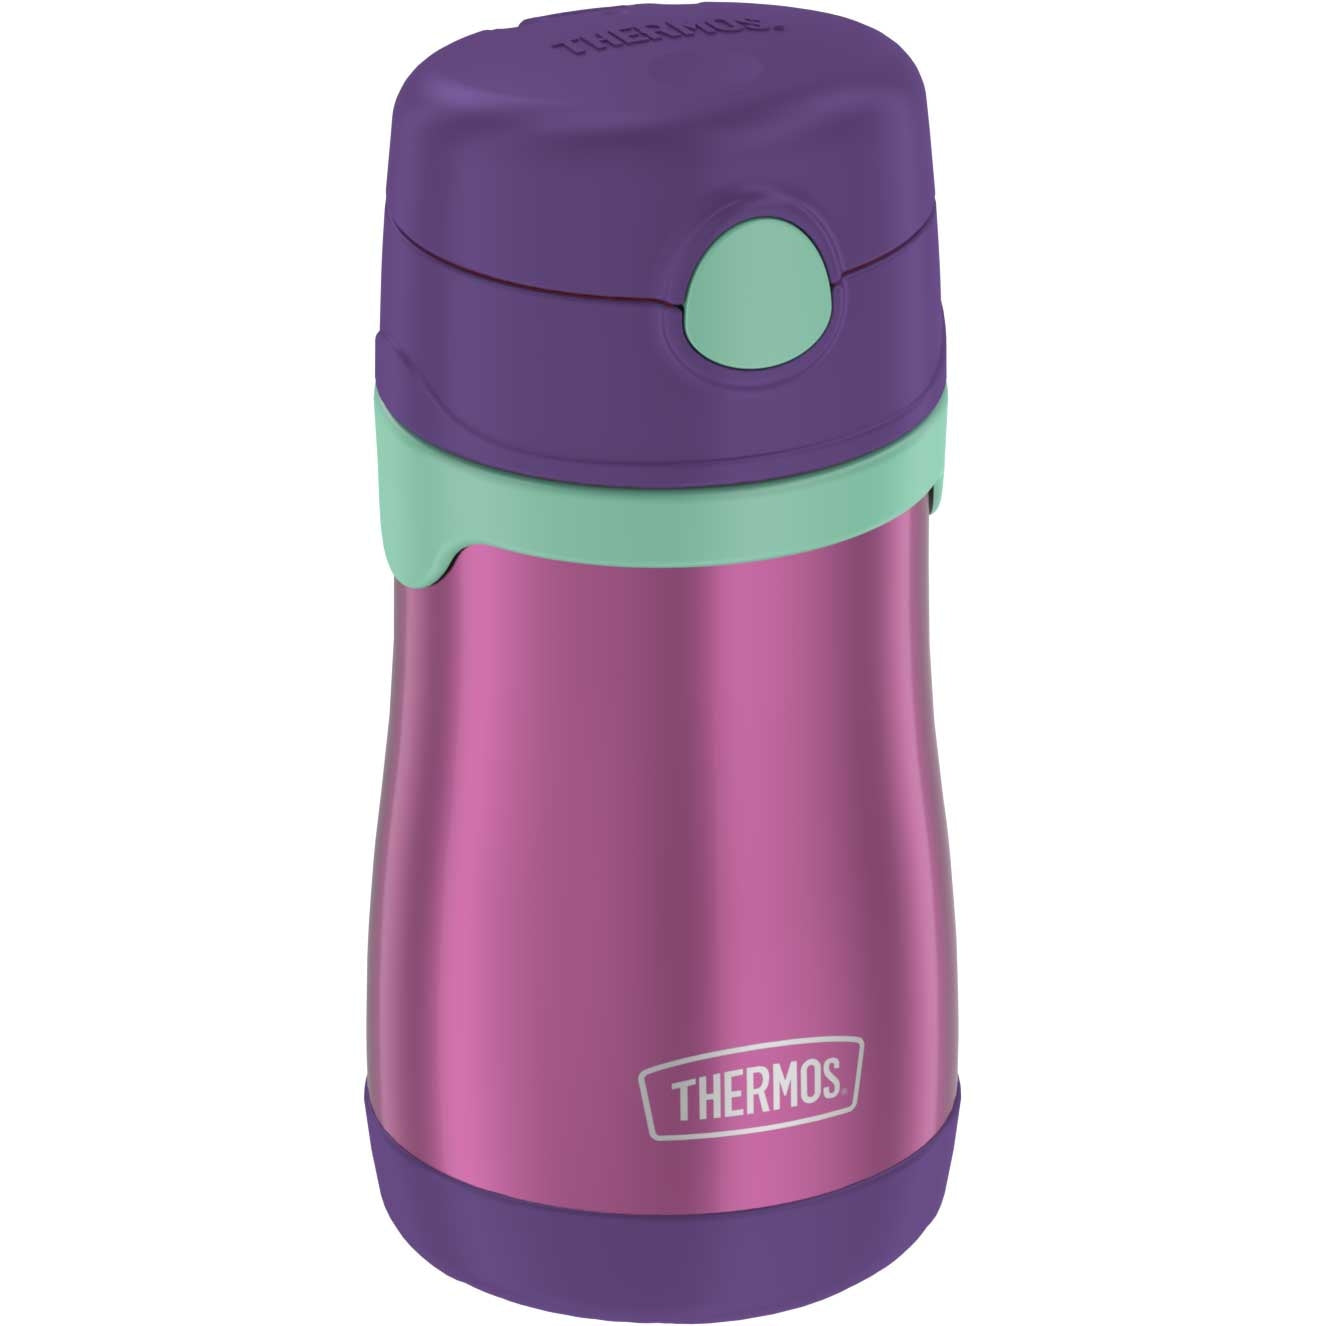 Thermos 10oz Stainless Steel Straw Bottle Blue